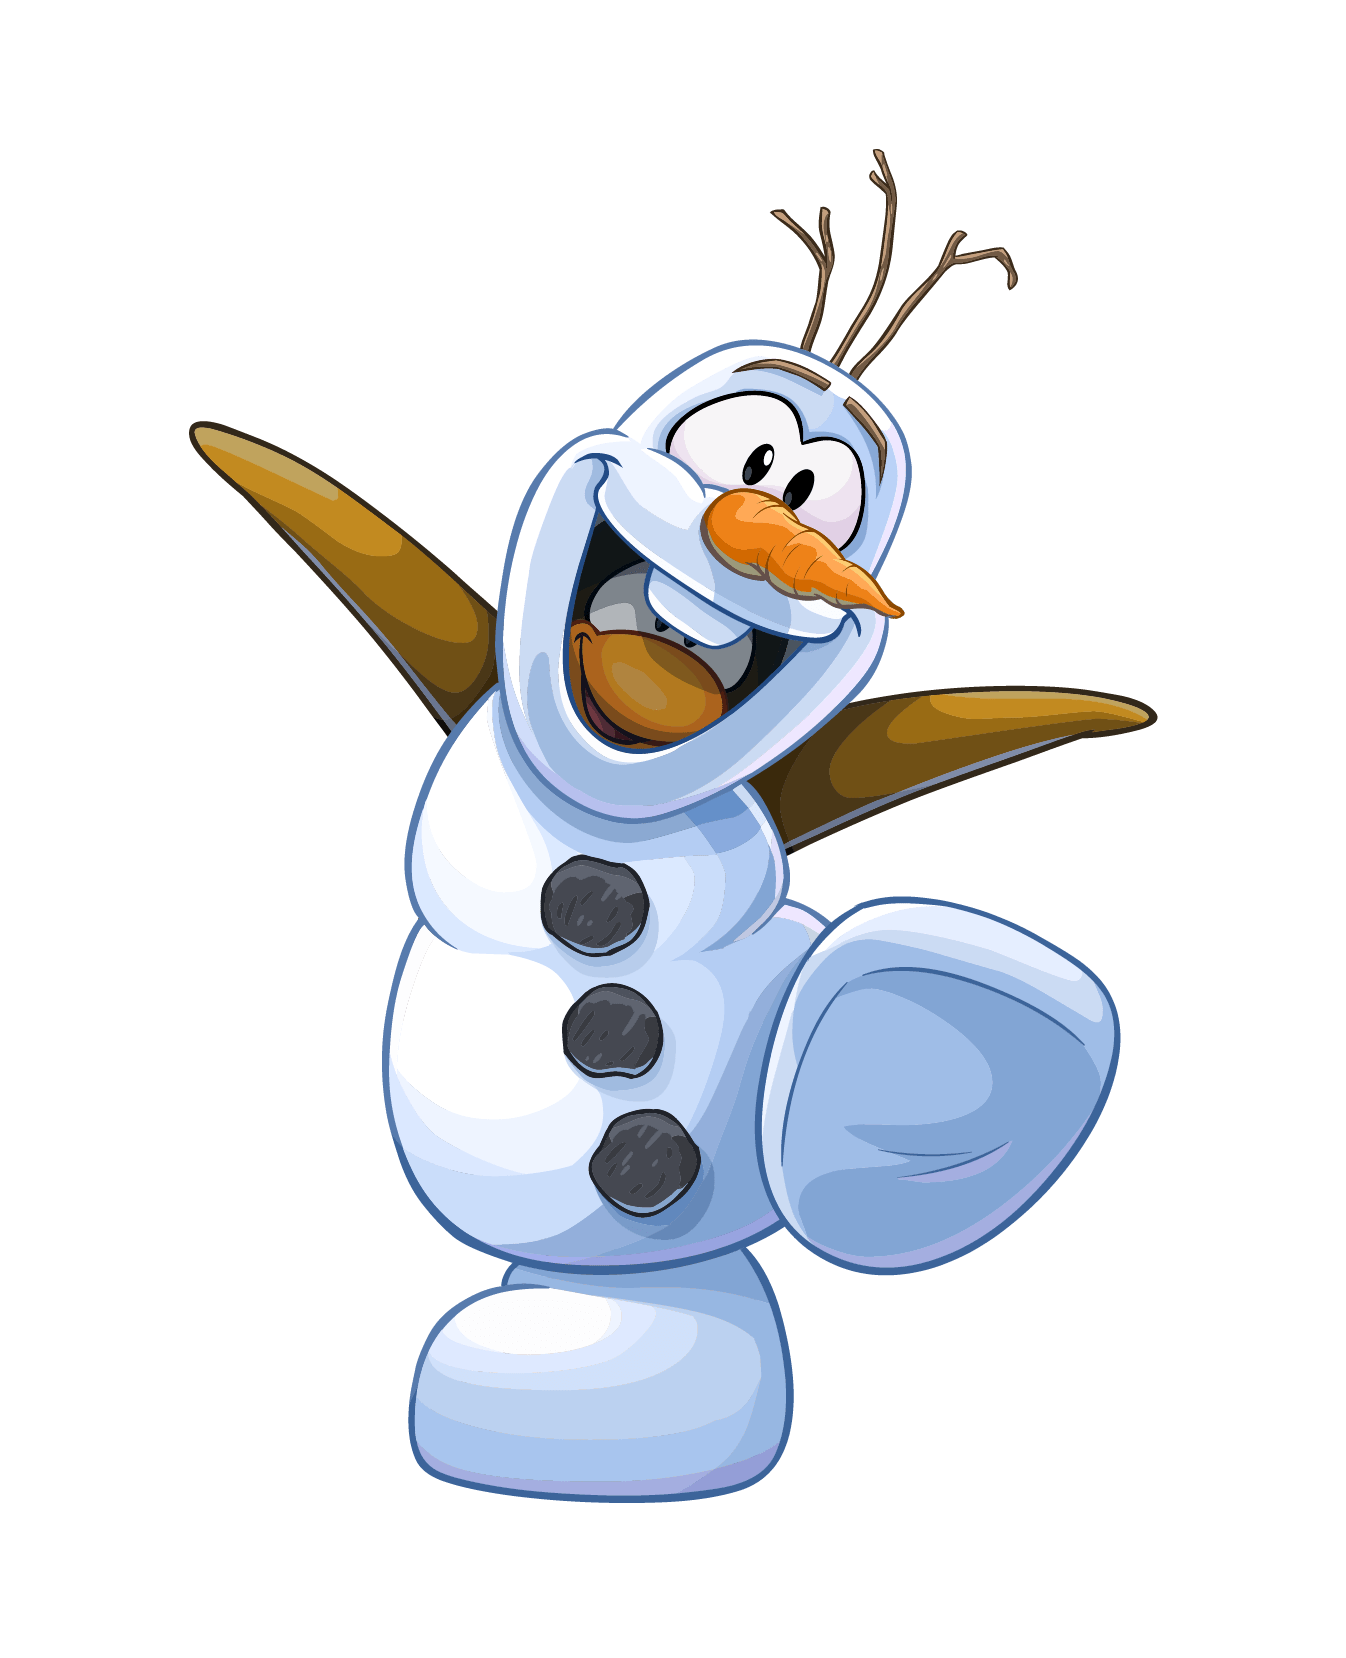 Download Olaf clipart file, Olaf file Transparent FREE for download ...